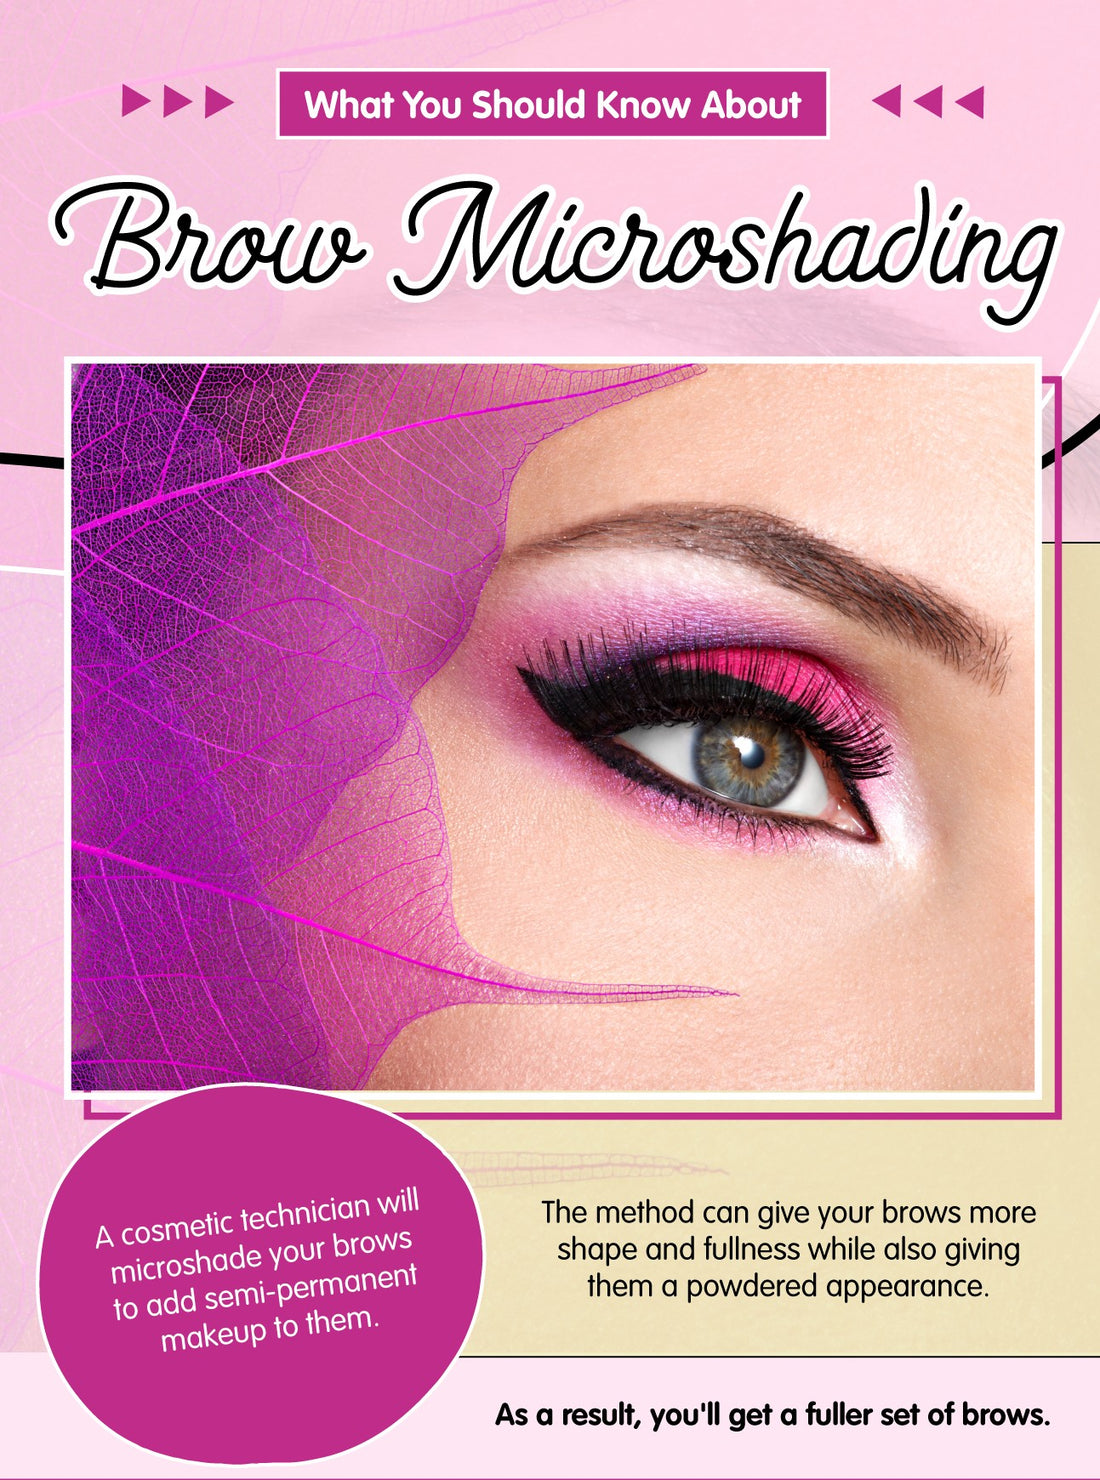 What You Should Know About Brow Microshading